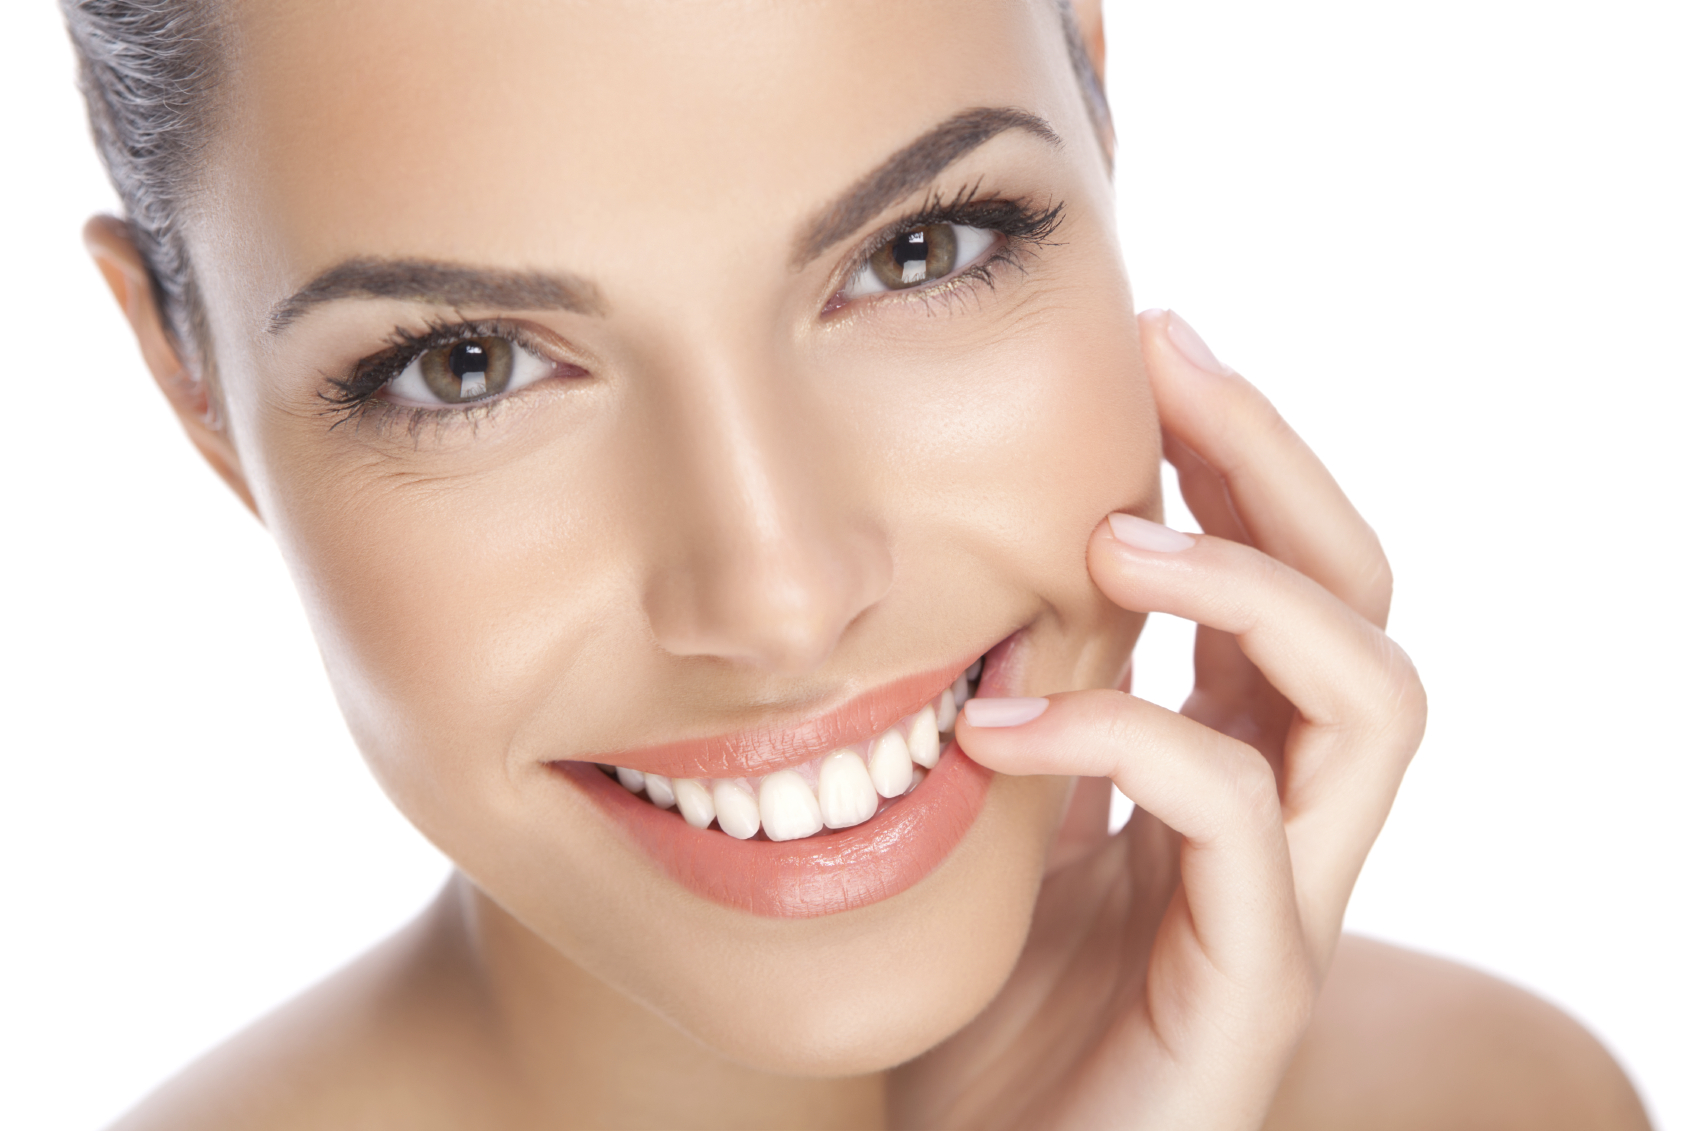 We are the best dentistry for dental veneers in Parramatta.